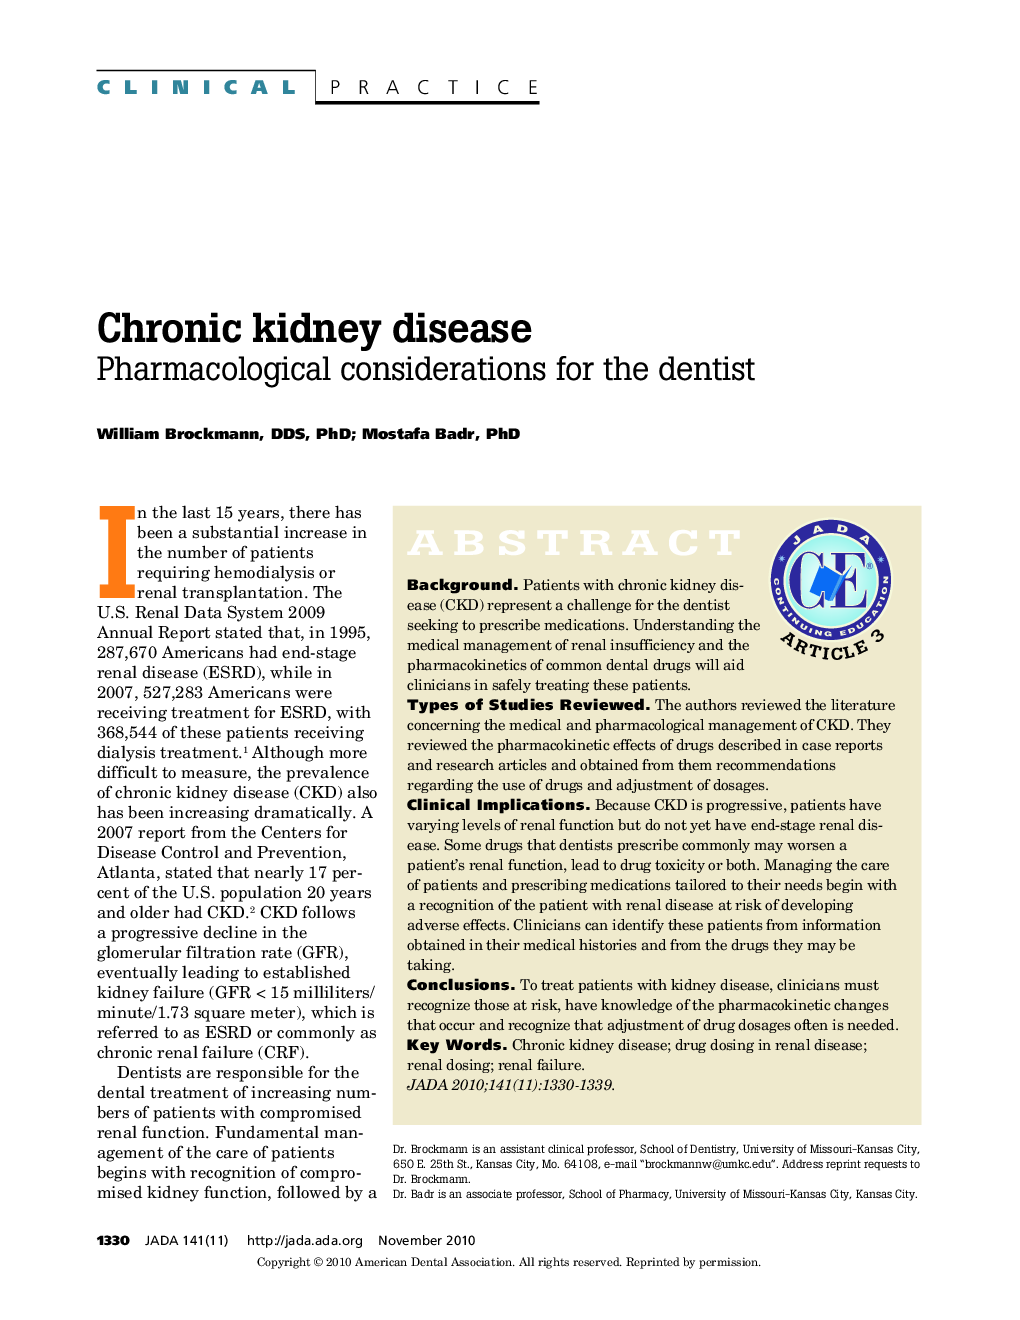 Chronic Kidney Disease : Pharmacological considerations for the dentist